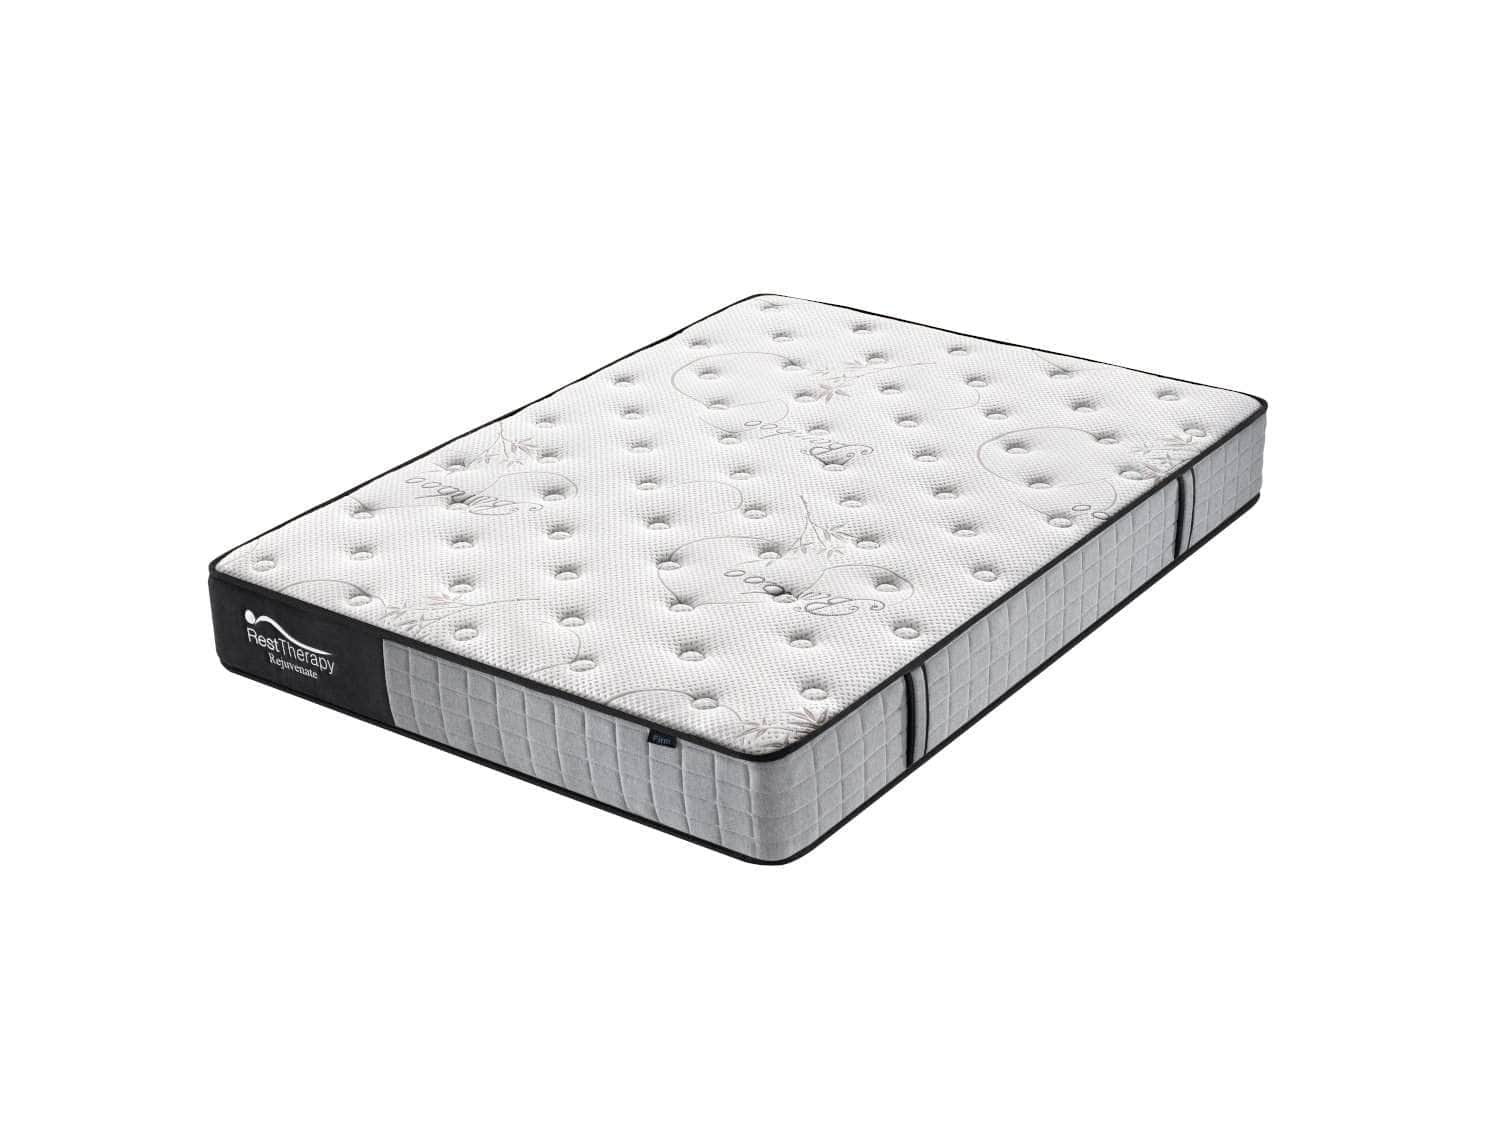 Rest Therapy Mattress Twin 10" Rejuvenate Pocket Coil Twin, Full, Queen, or King Size Bed Mattresses